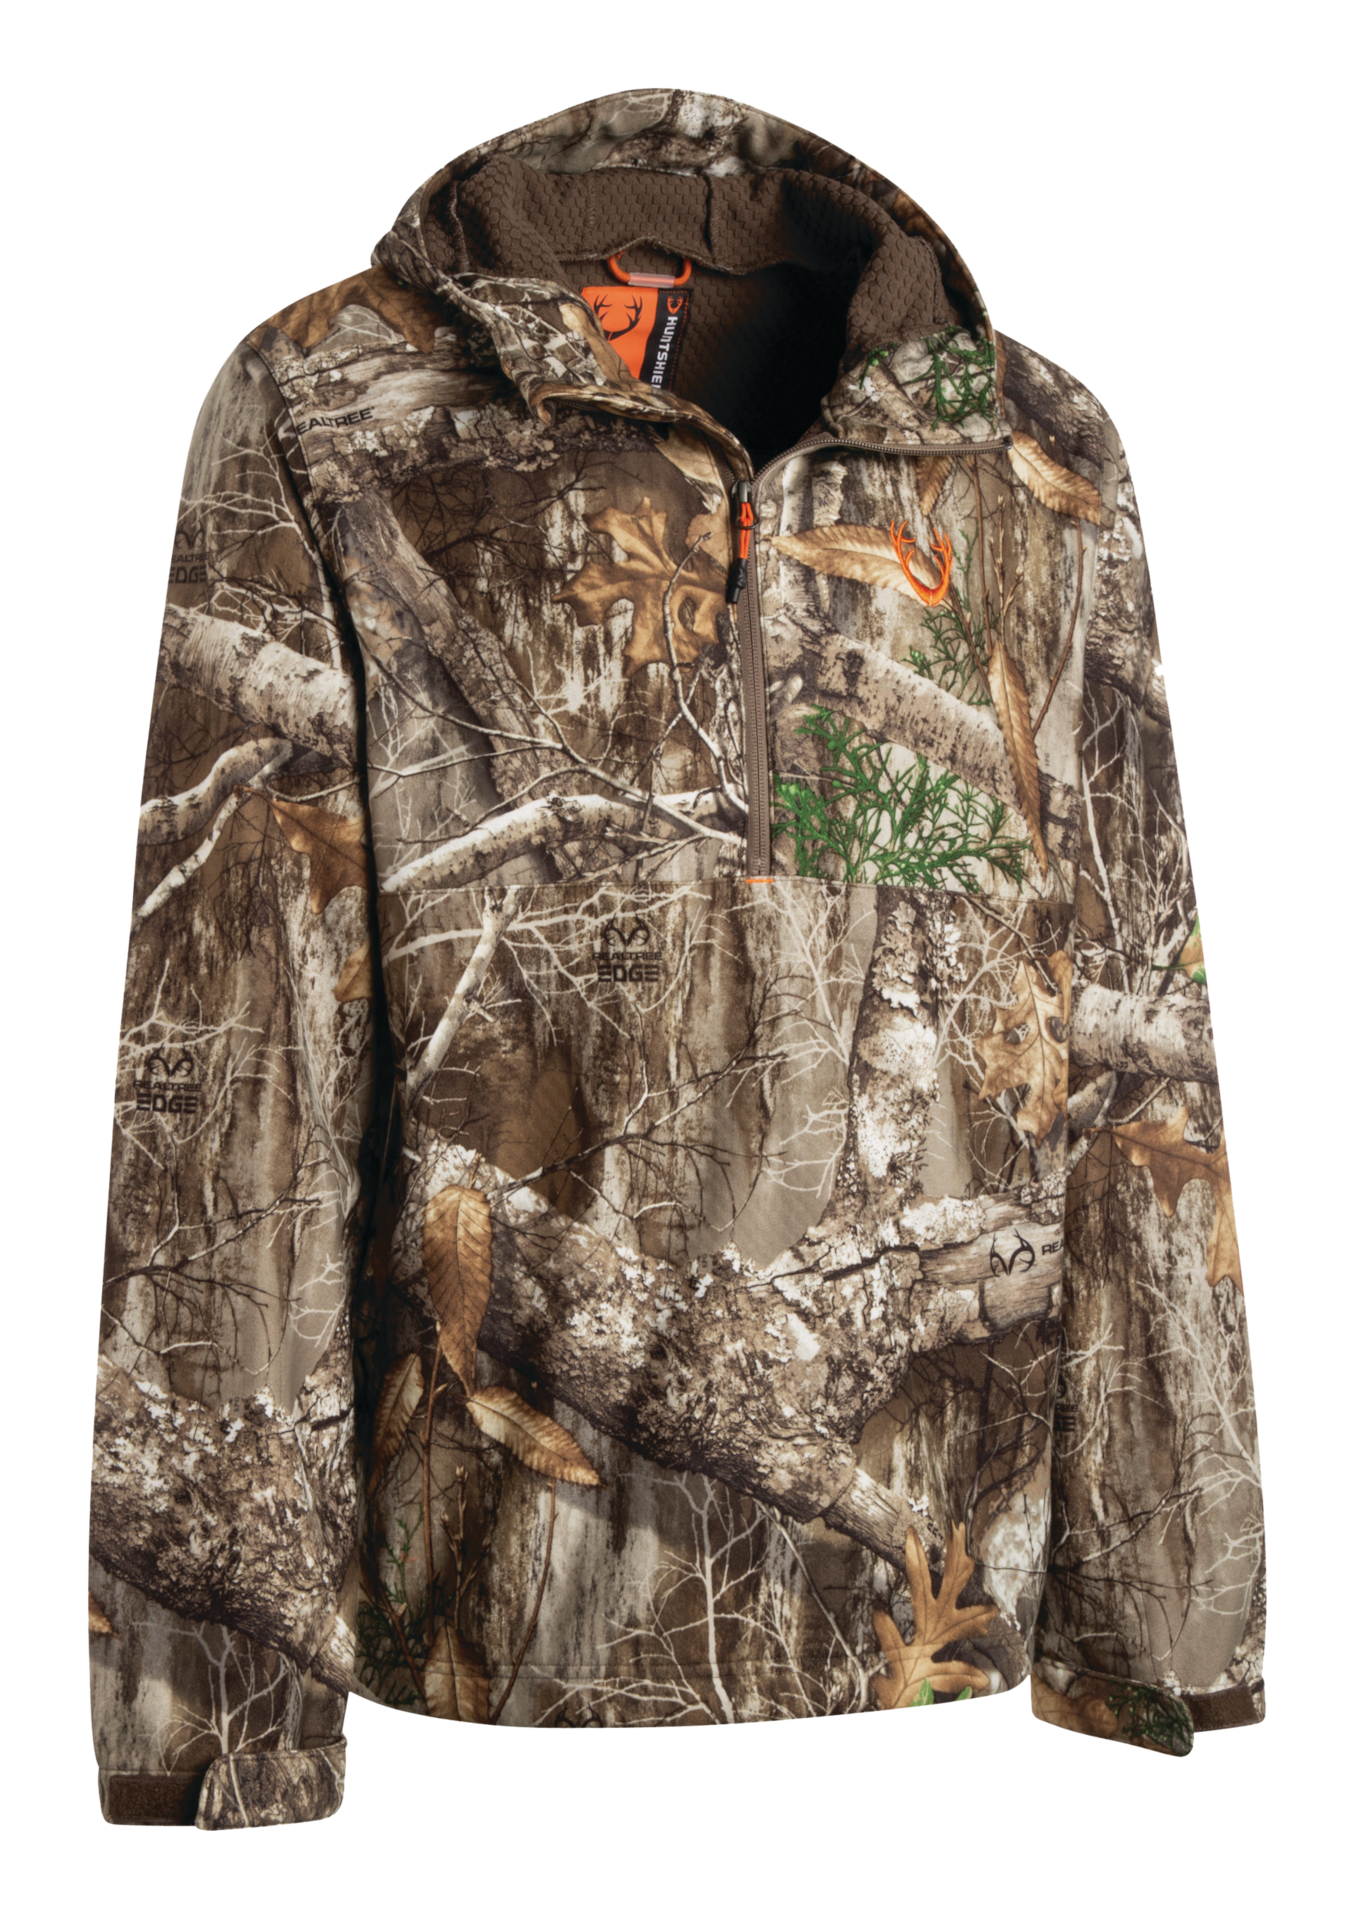 https://media-www.canadiantire.ca/product/playing/hunting/hunting-apparel-footwear/3750252/october-hs-rt-edge-m-pullover-jacket-m-4653ba7c-d058-45a6-aeb2-2d52bd843f74.png